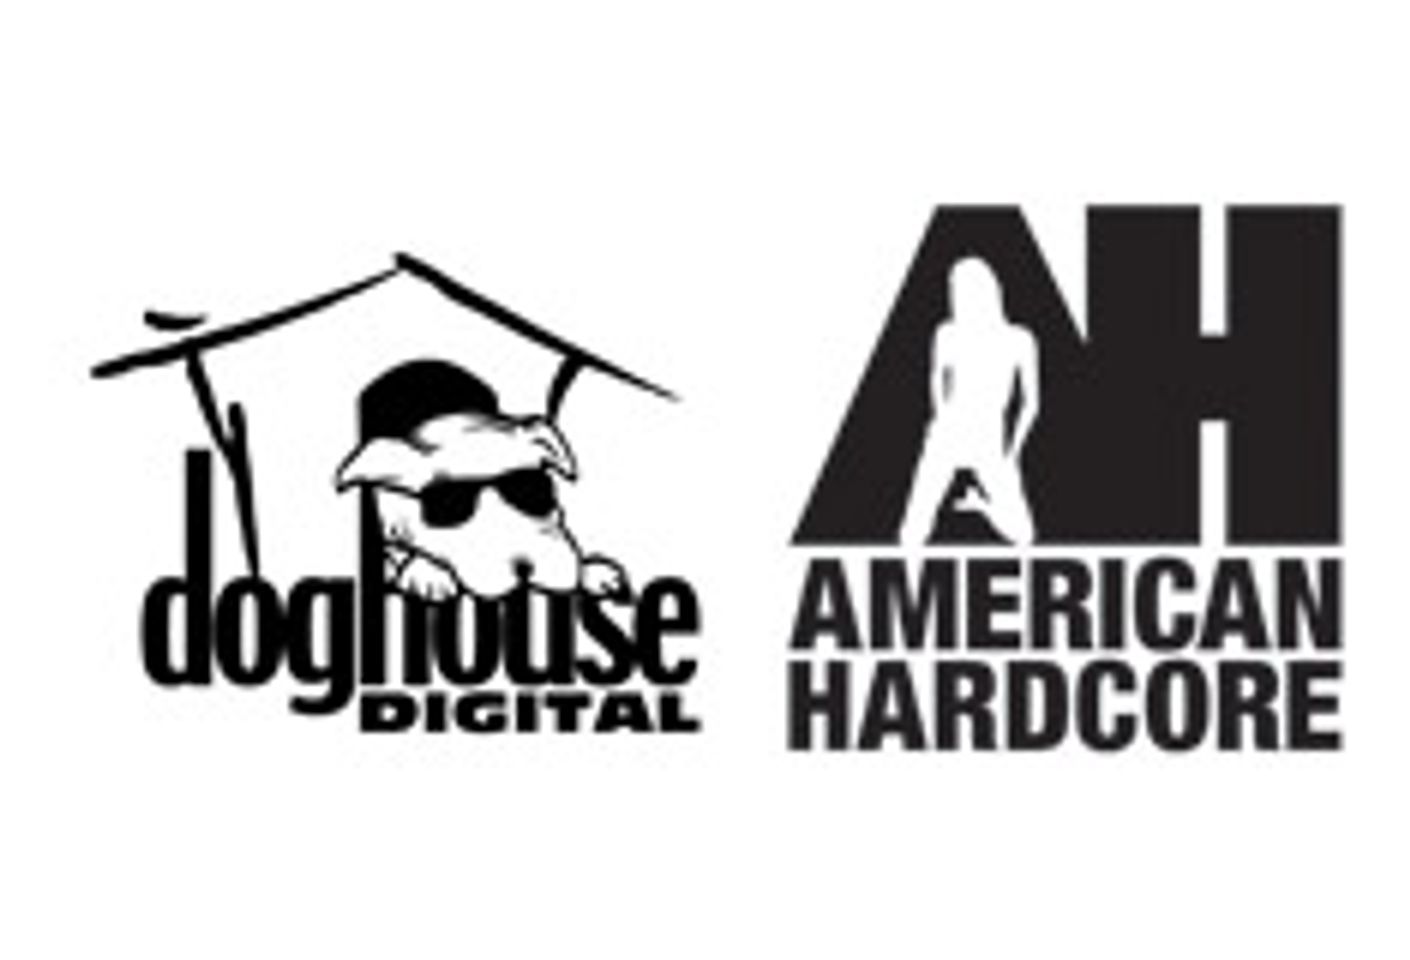 Doghouse Digital Signs Distribution Deal with American Hardcore